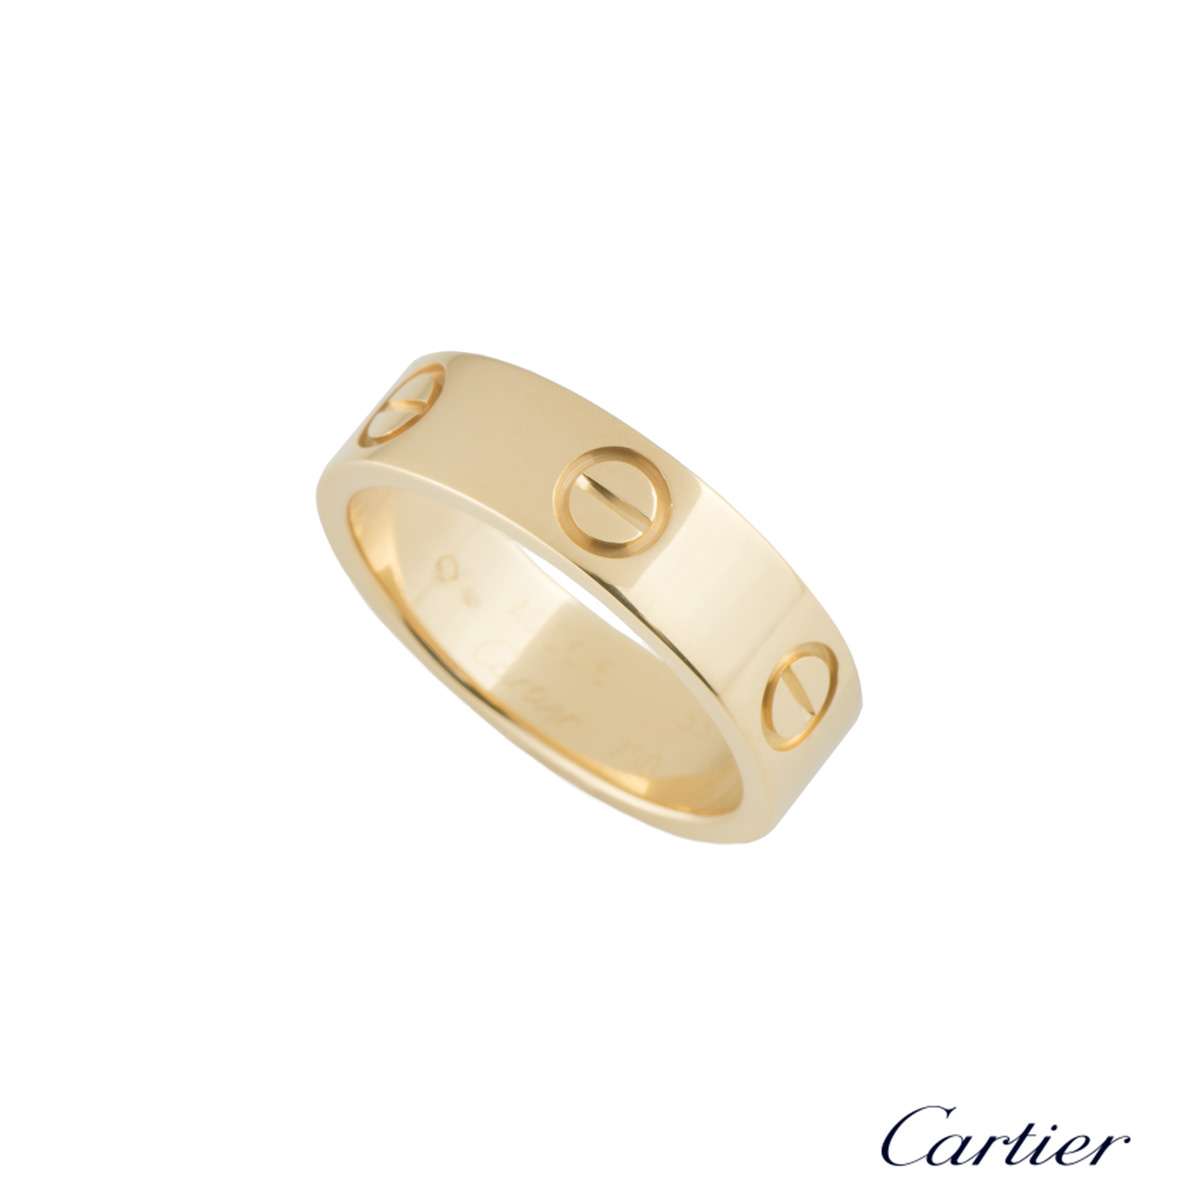 cartier ring 53